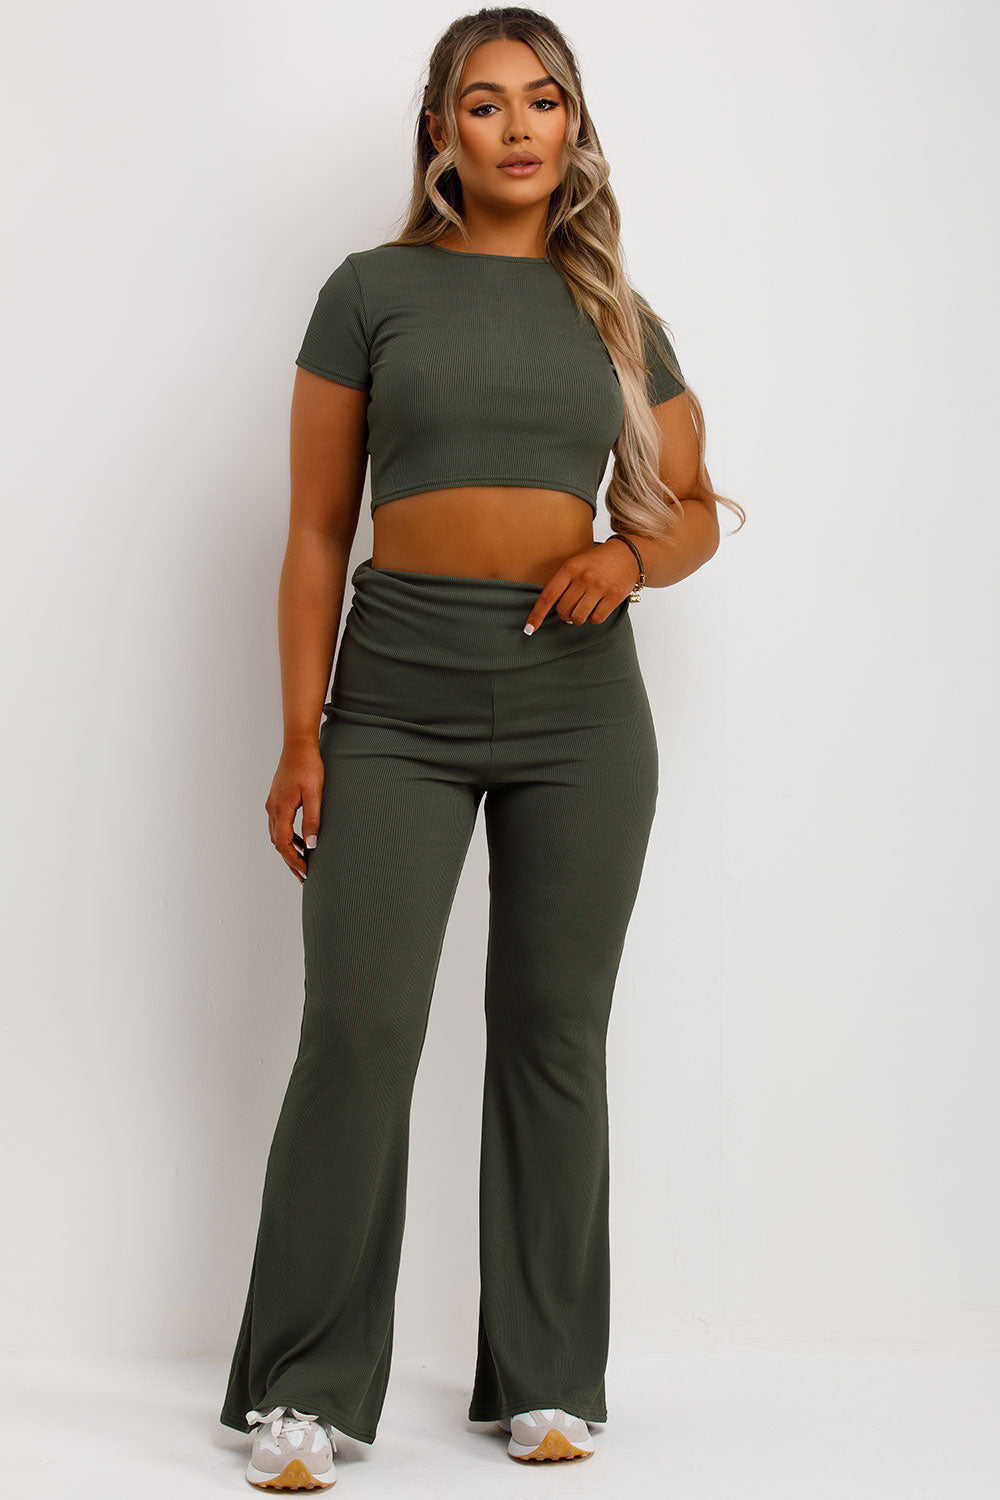 skinny flared trousers with fold over detail and crop top co order set